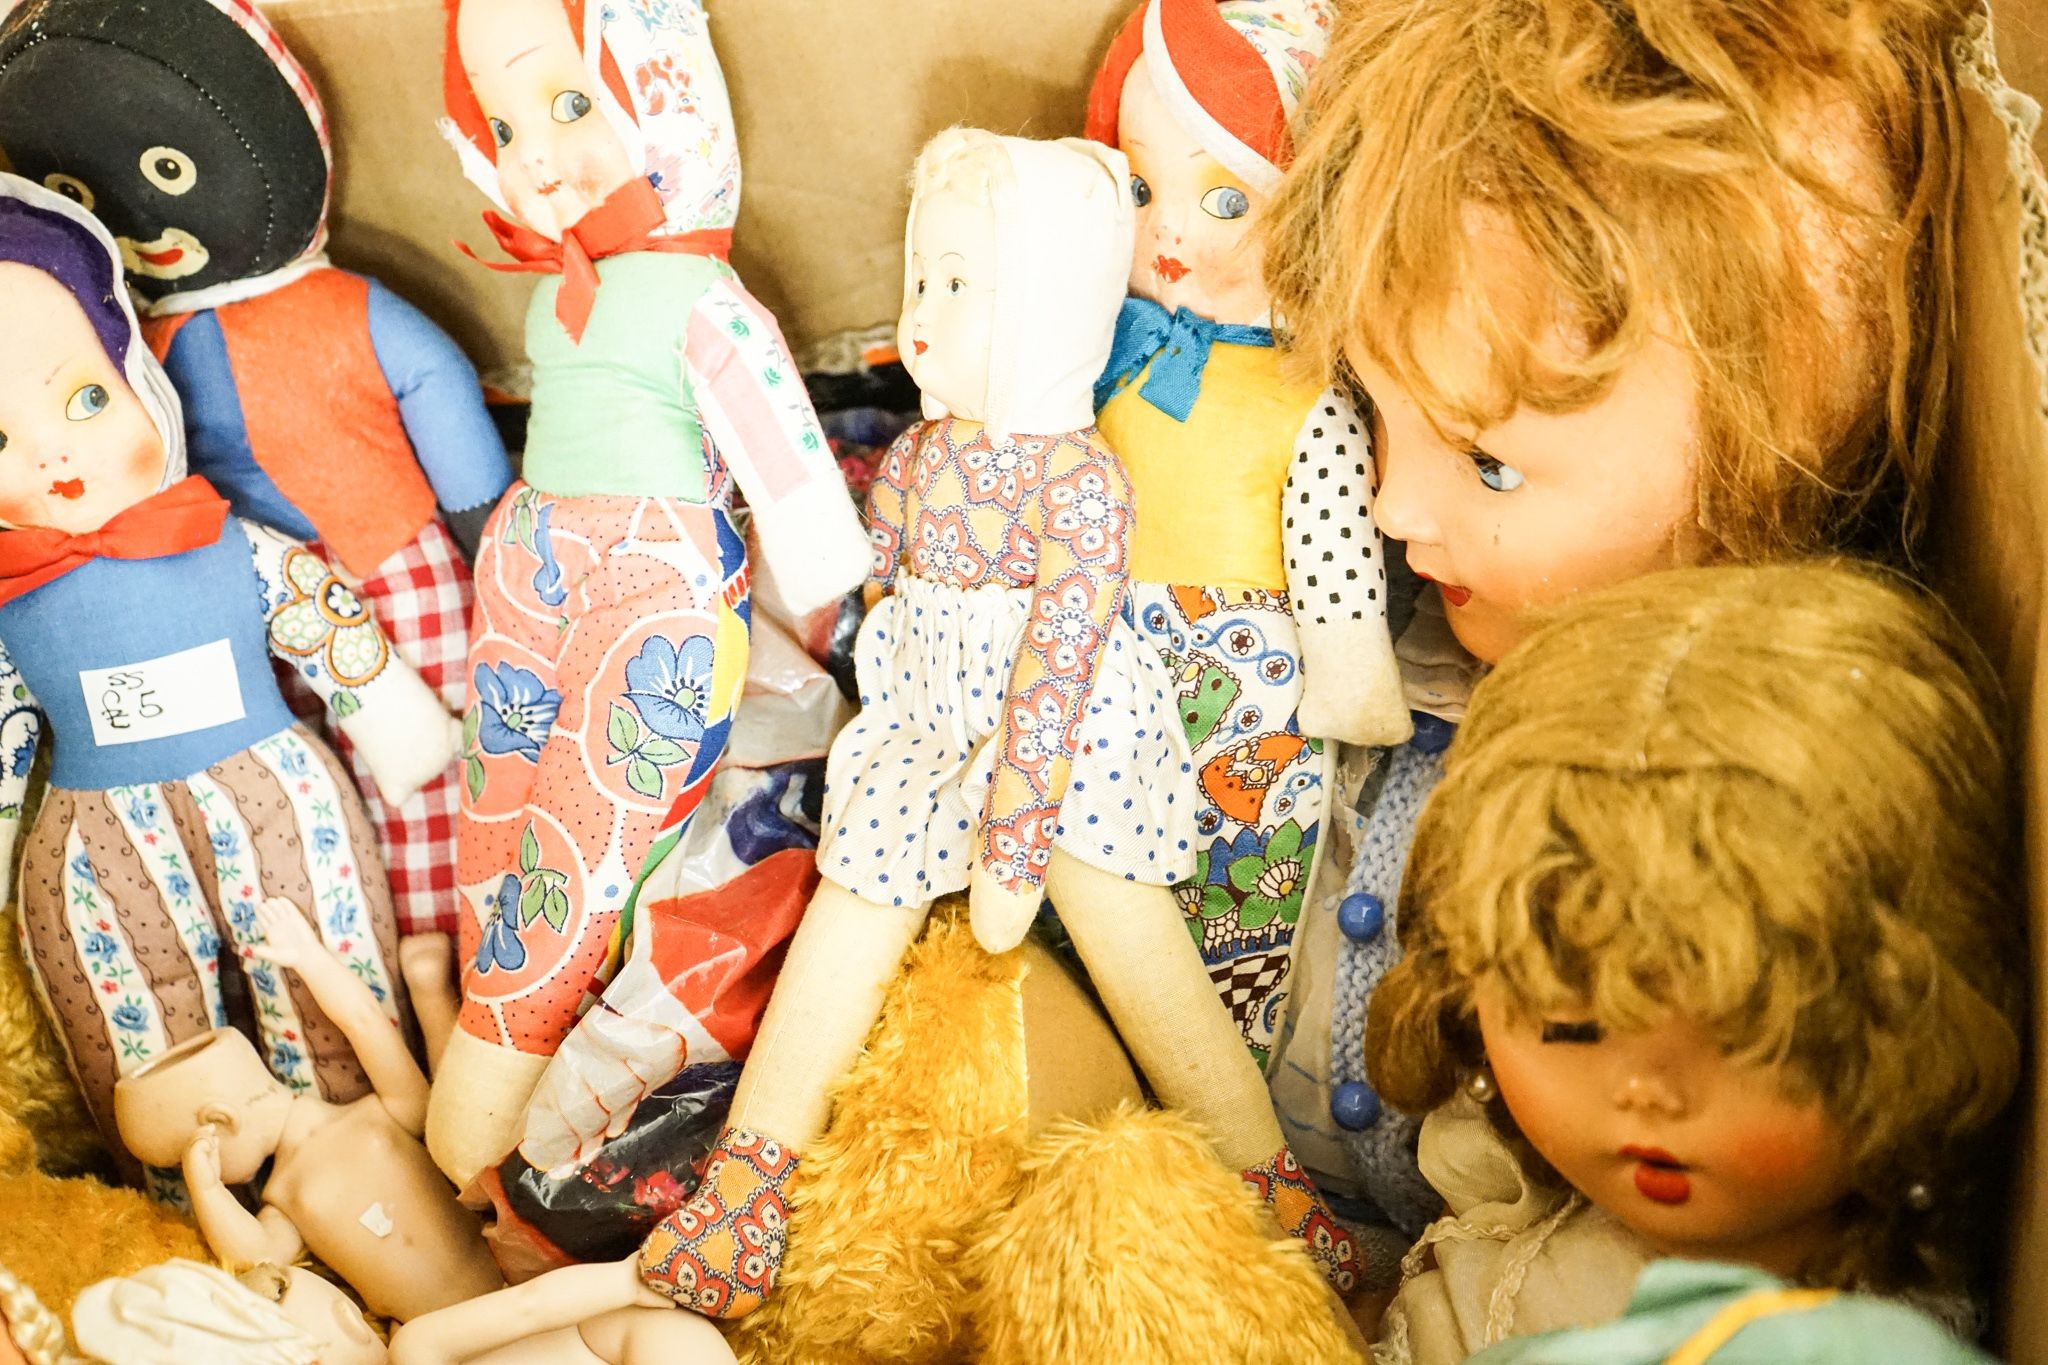 A quantity of mixed dolls, teddy bears and puppets